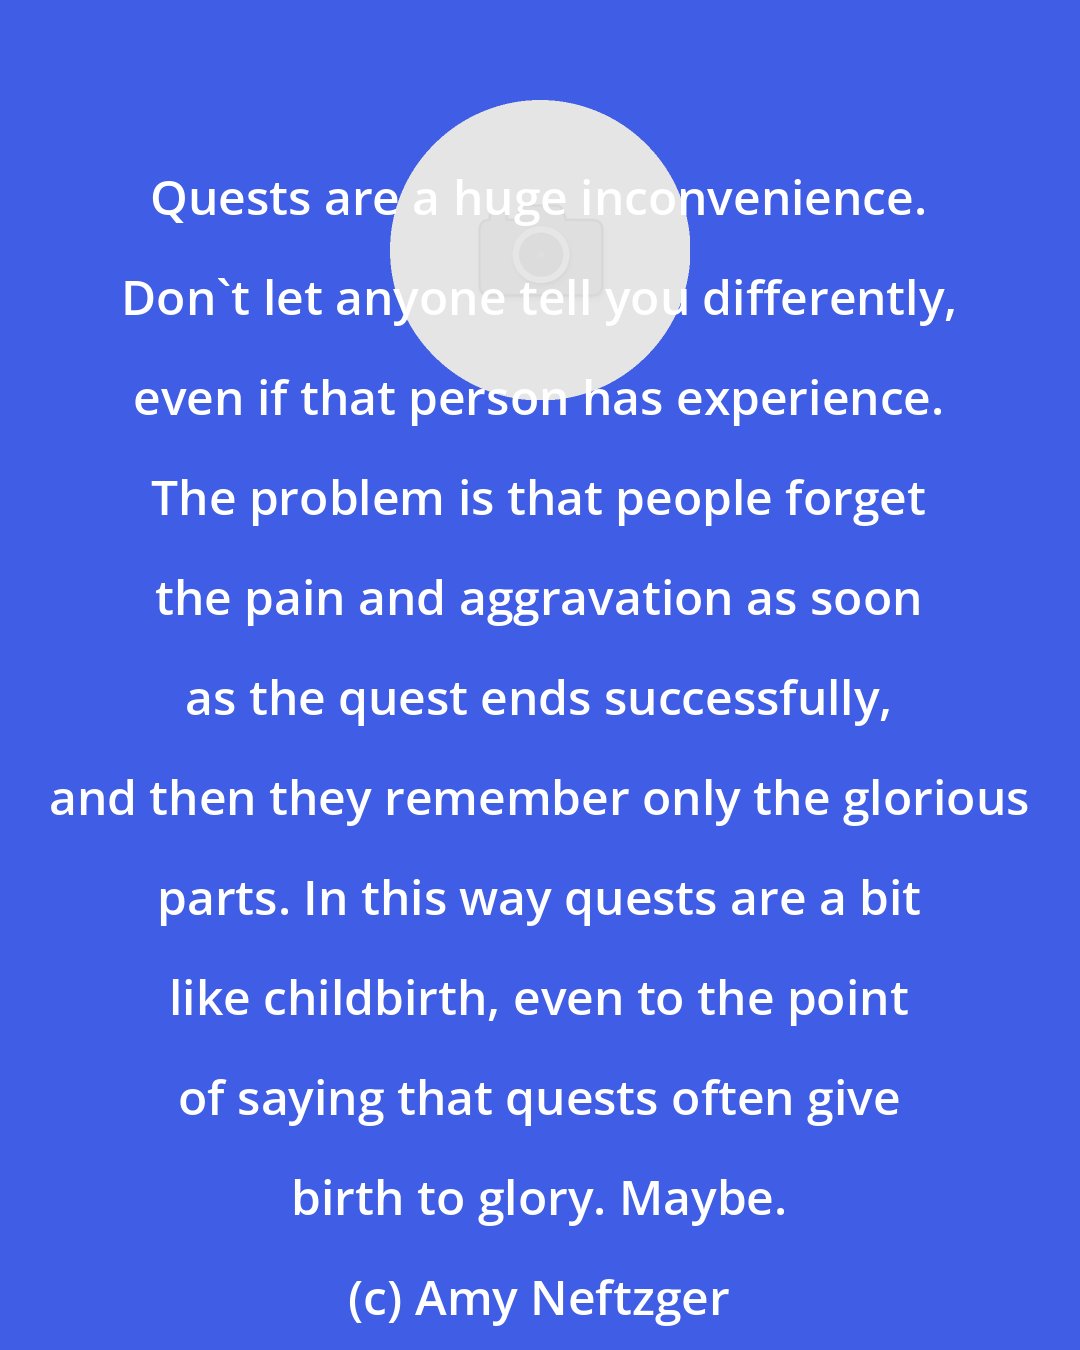 Amy Neftzger: Quests are a huge inconvenience. Don't let anyone tell you differently, even if that person has experience. The problem is that people forget the pain and aggravation as soon as the quest ends successfully, and then they remember only the glorious parts. In this way quests are a bit like childbirth, even to the point of saying that quests often give birth to glory. Maybe.